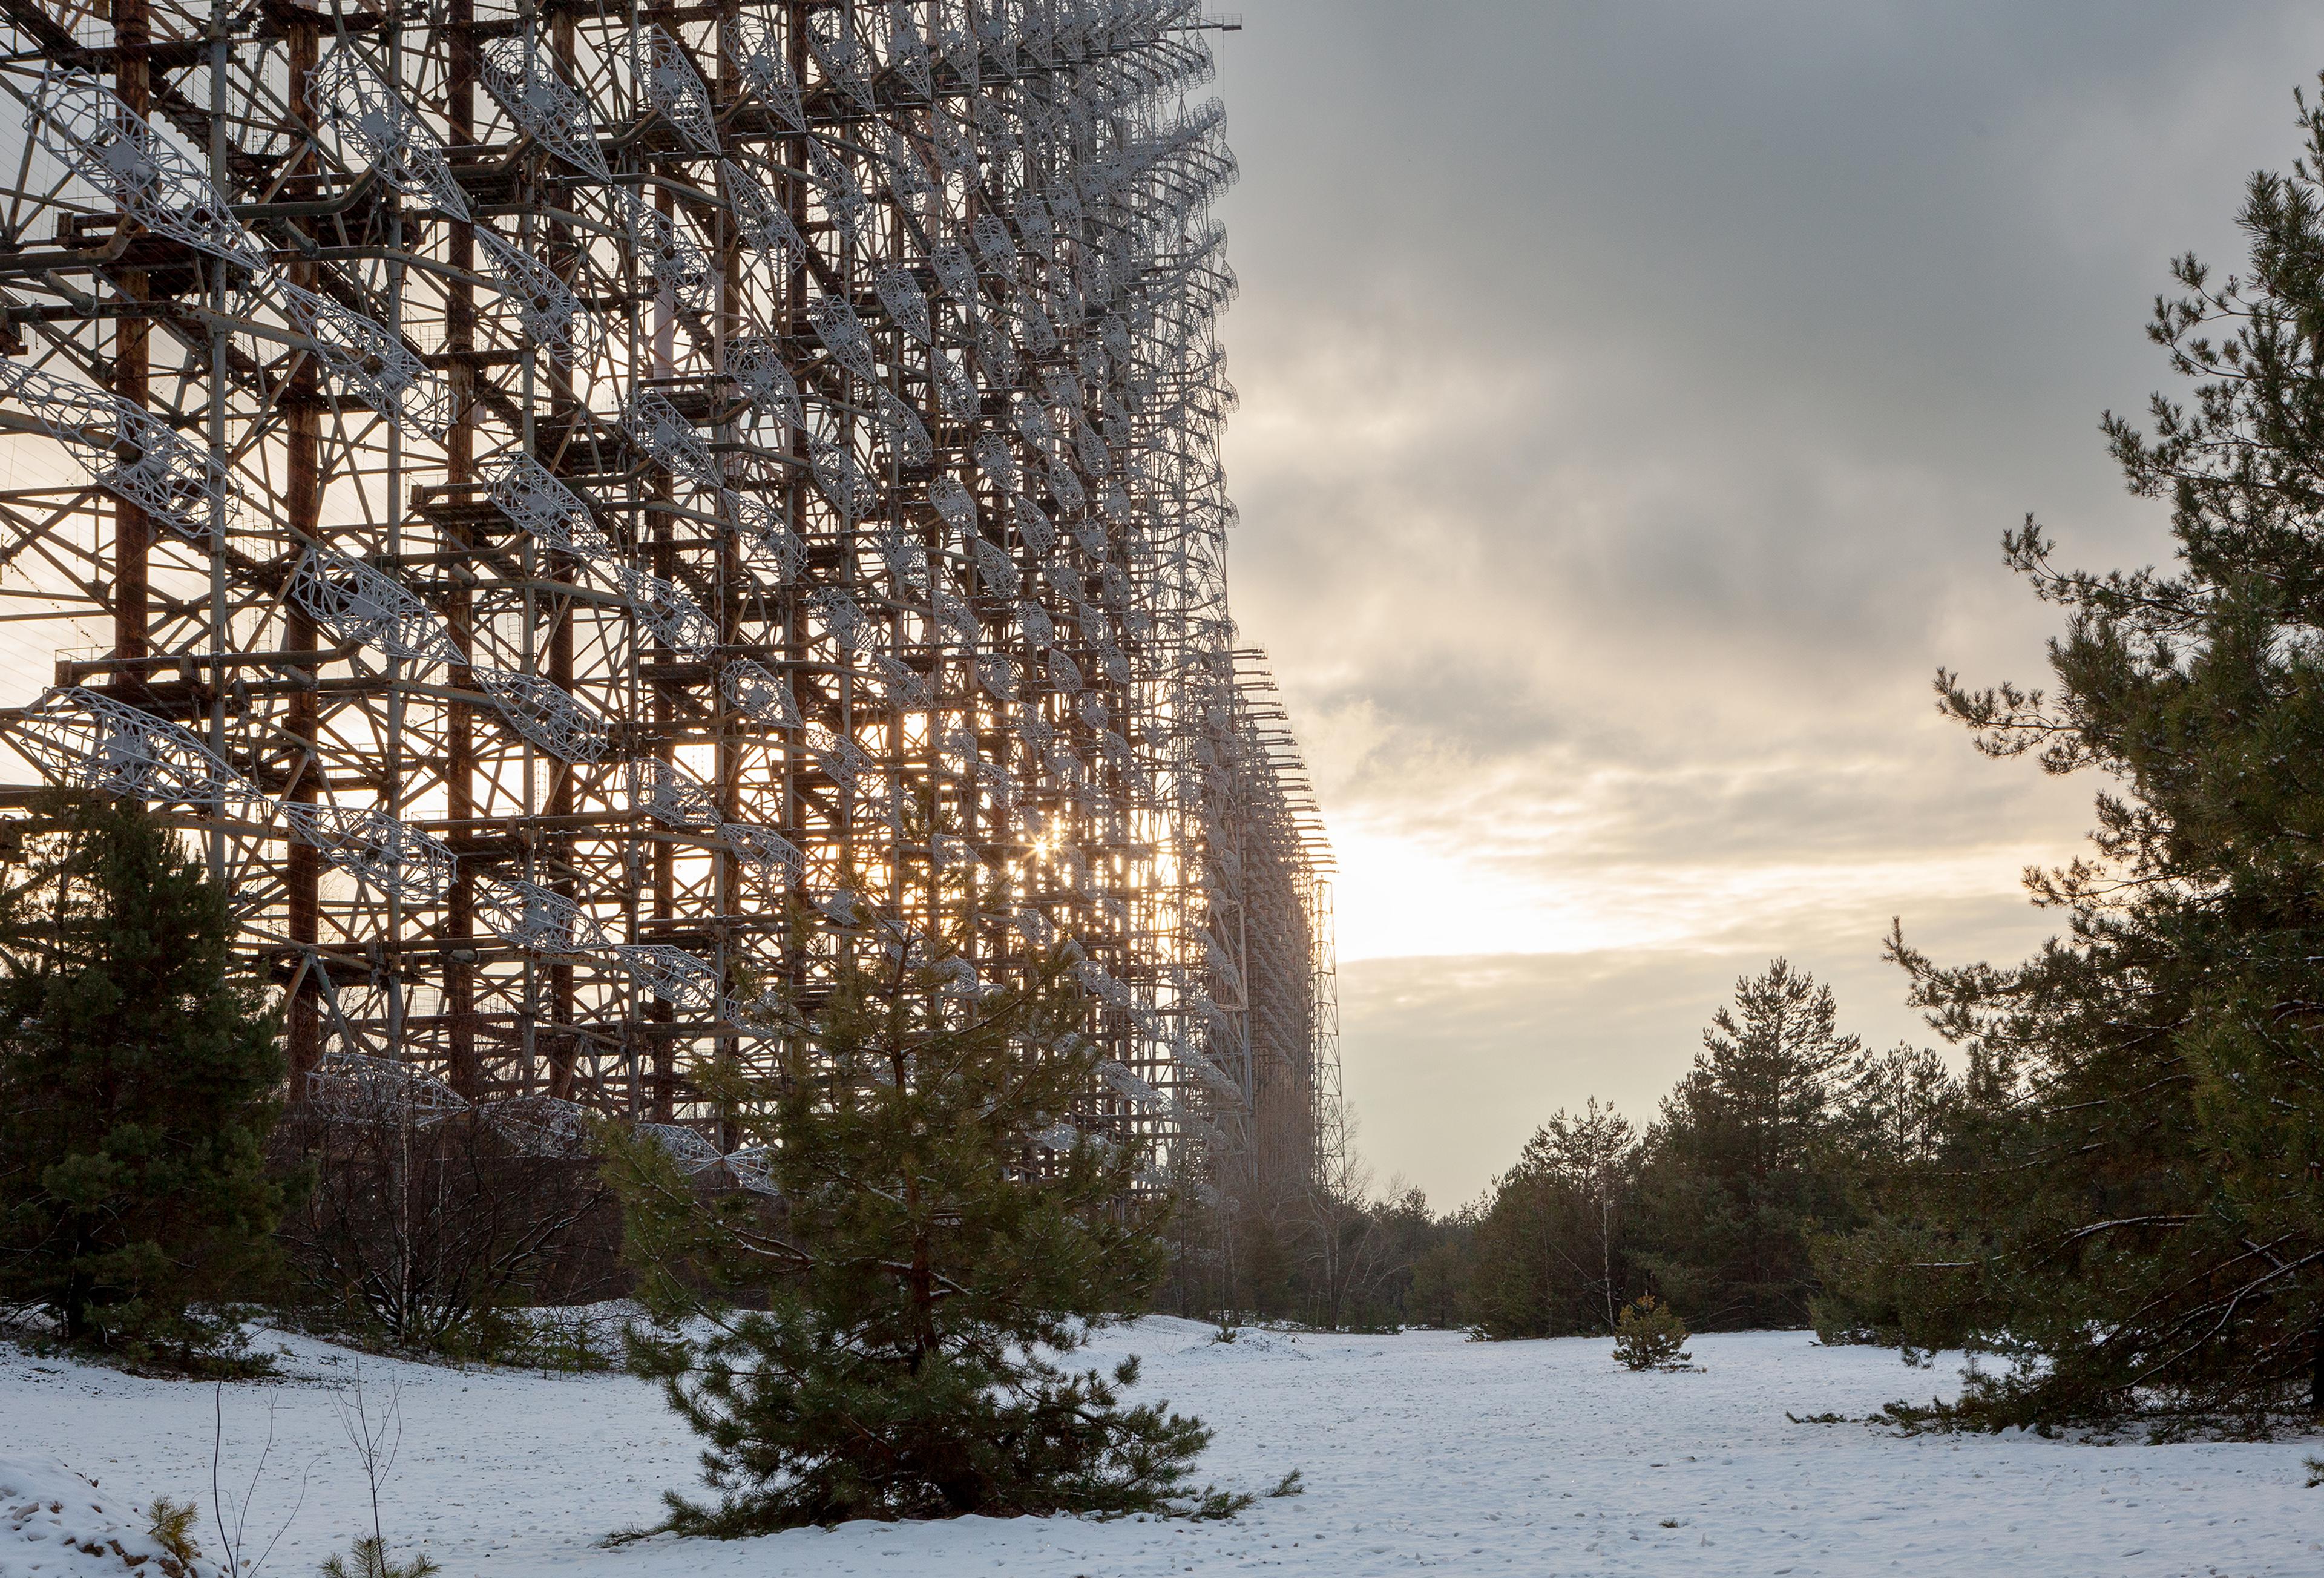 Colour photograph of large metal framework structure in a snowy landscape